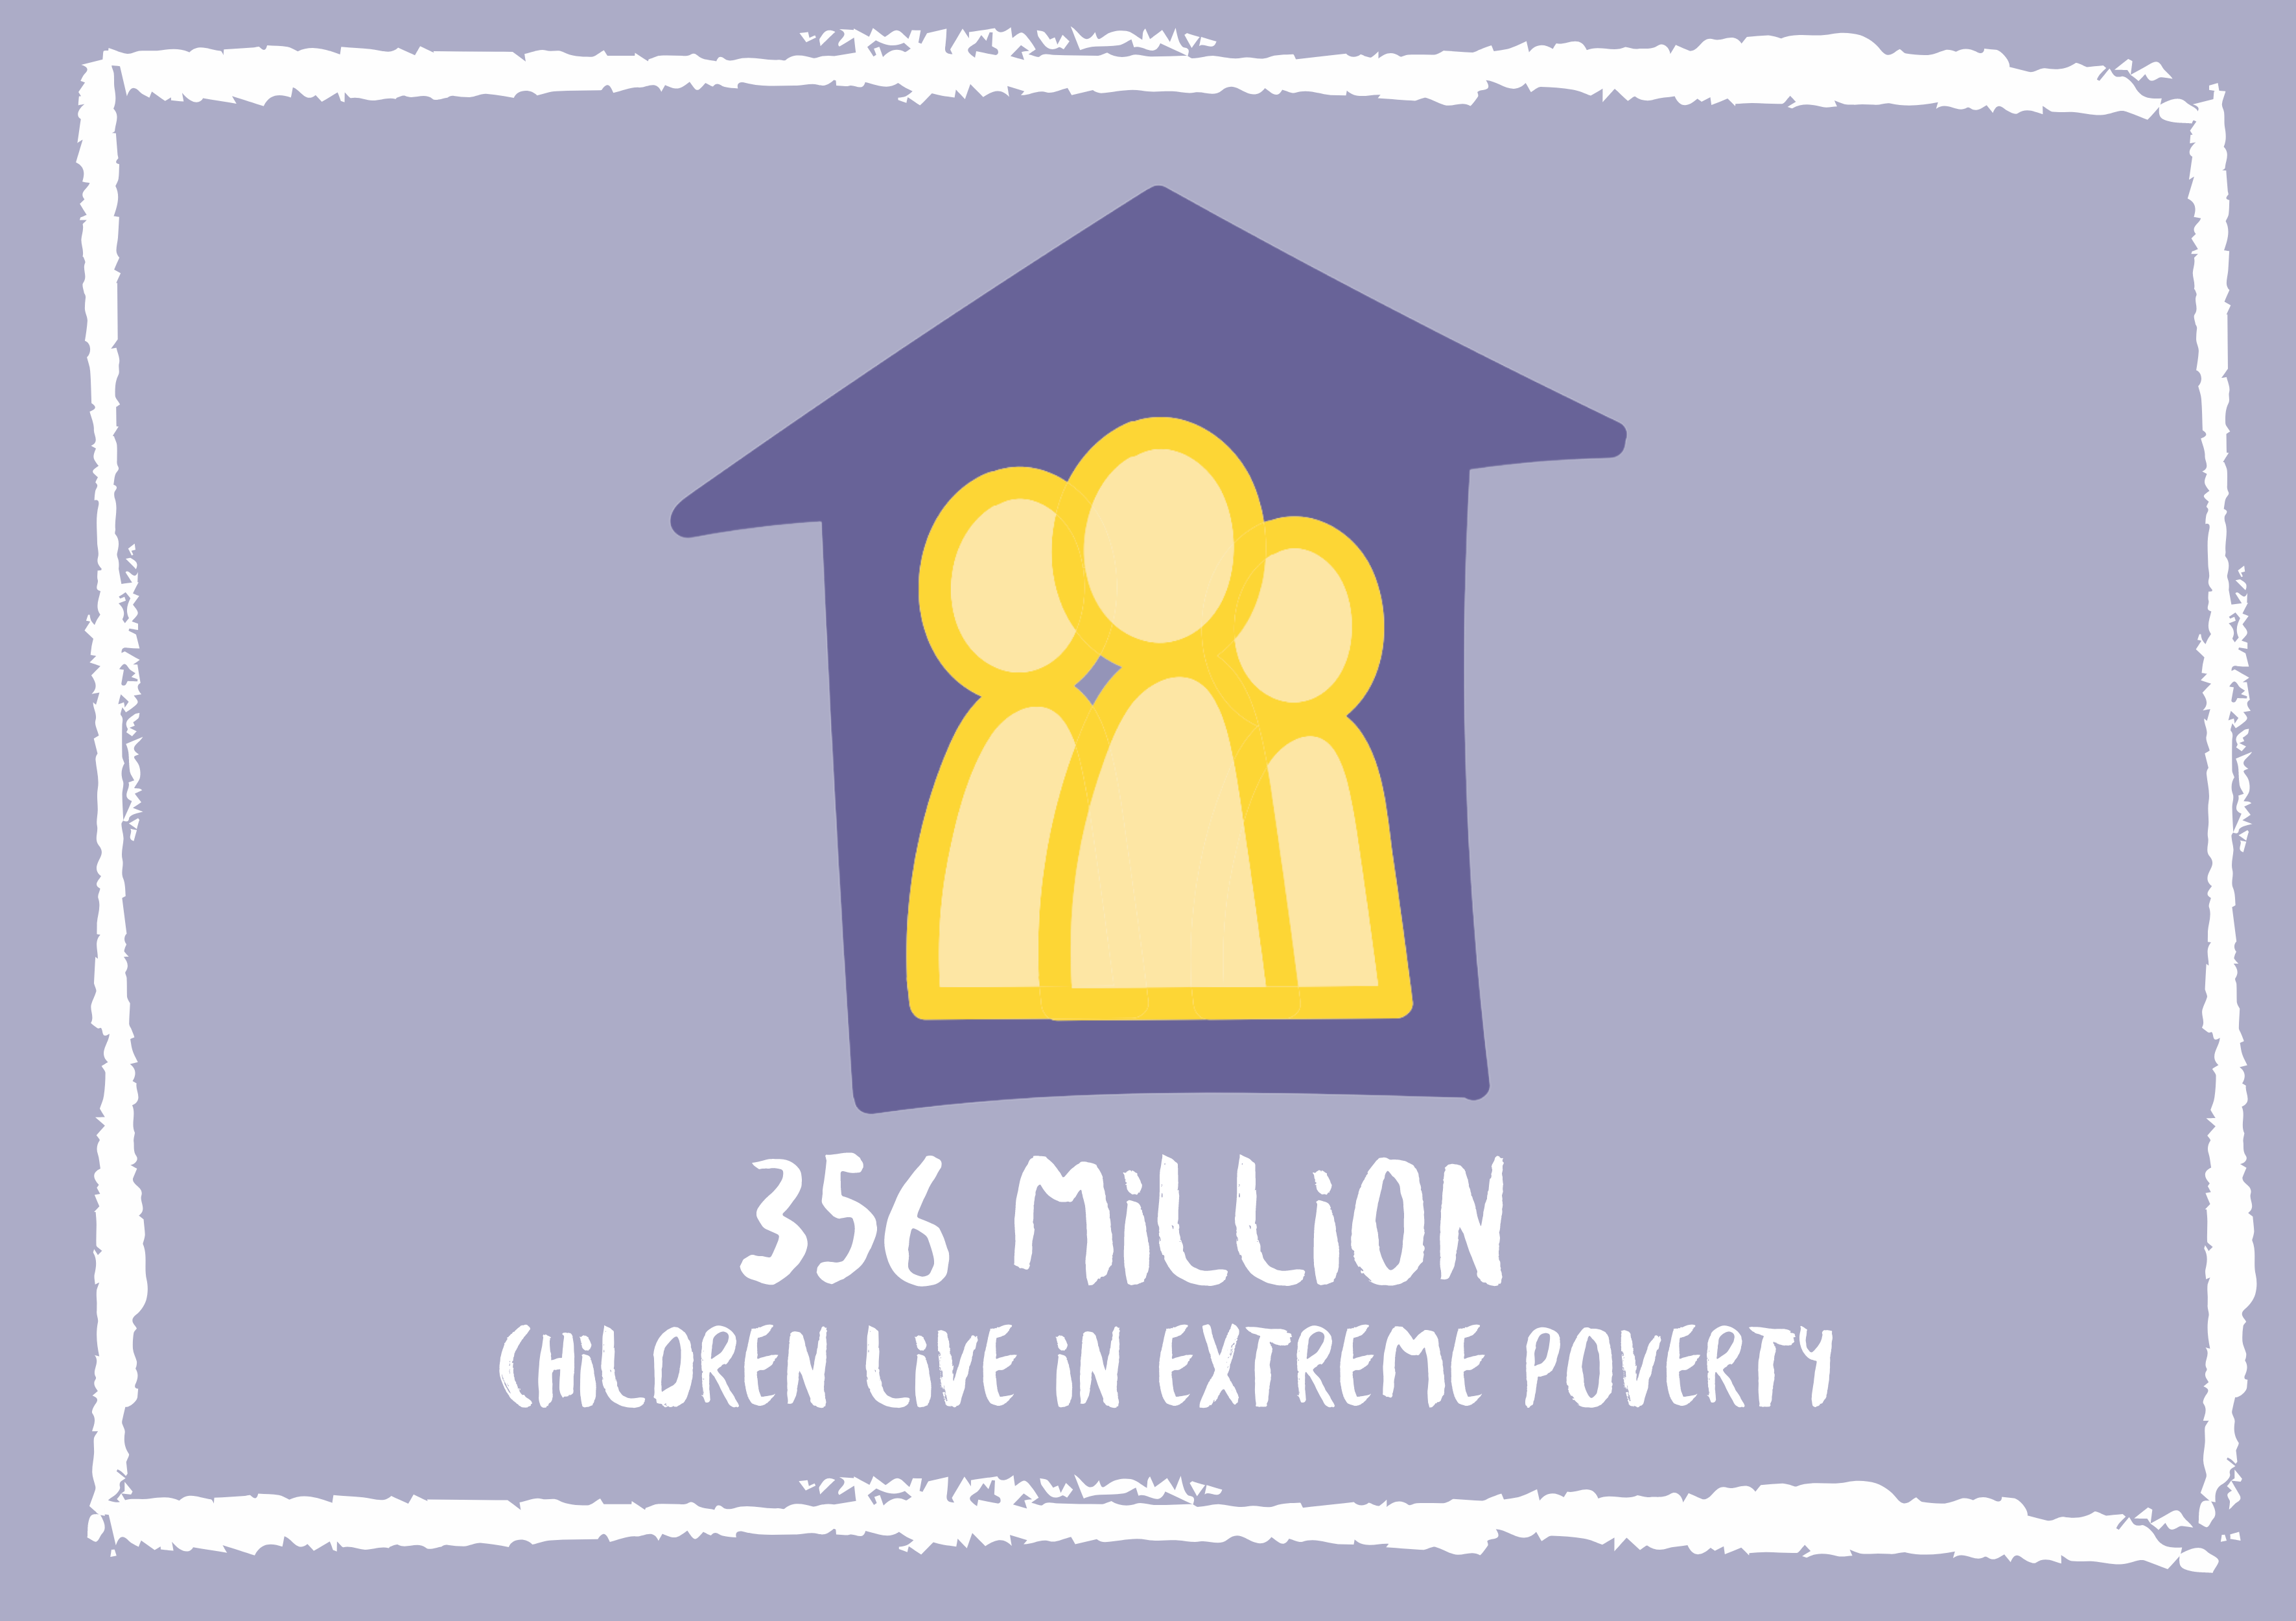 8 Million children in the world live in orphanages